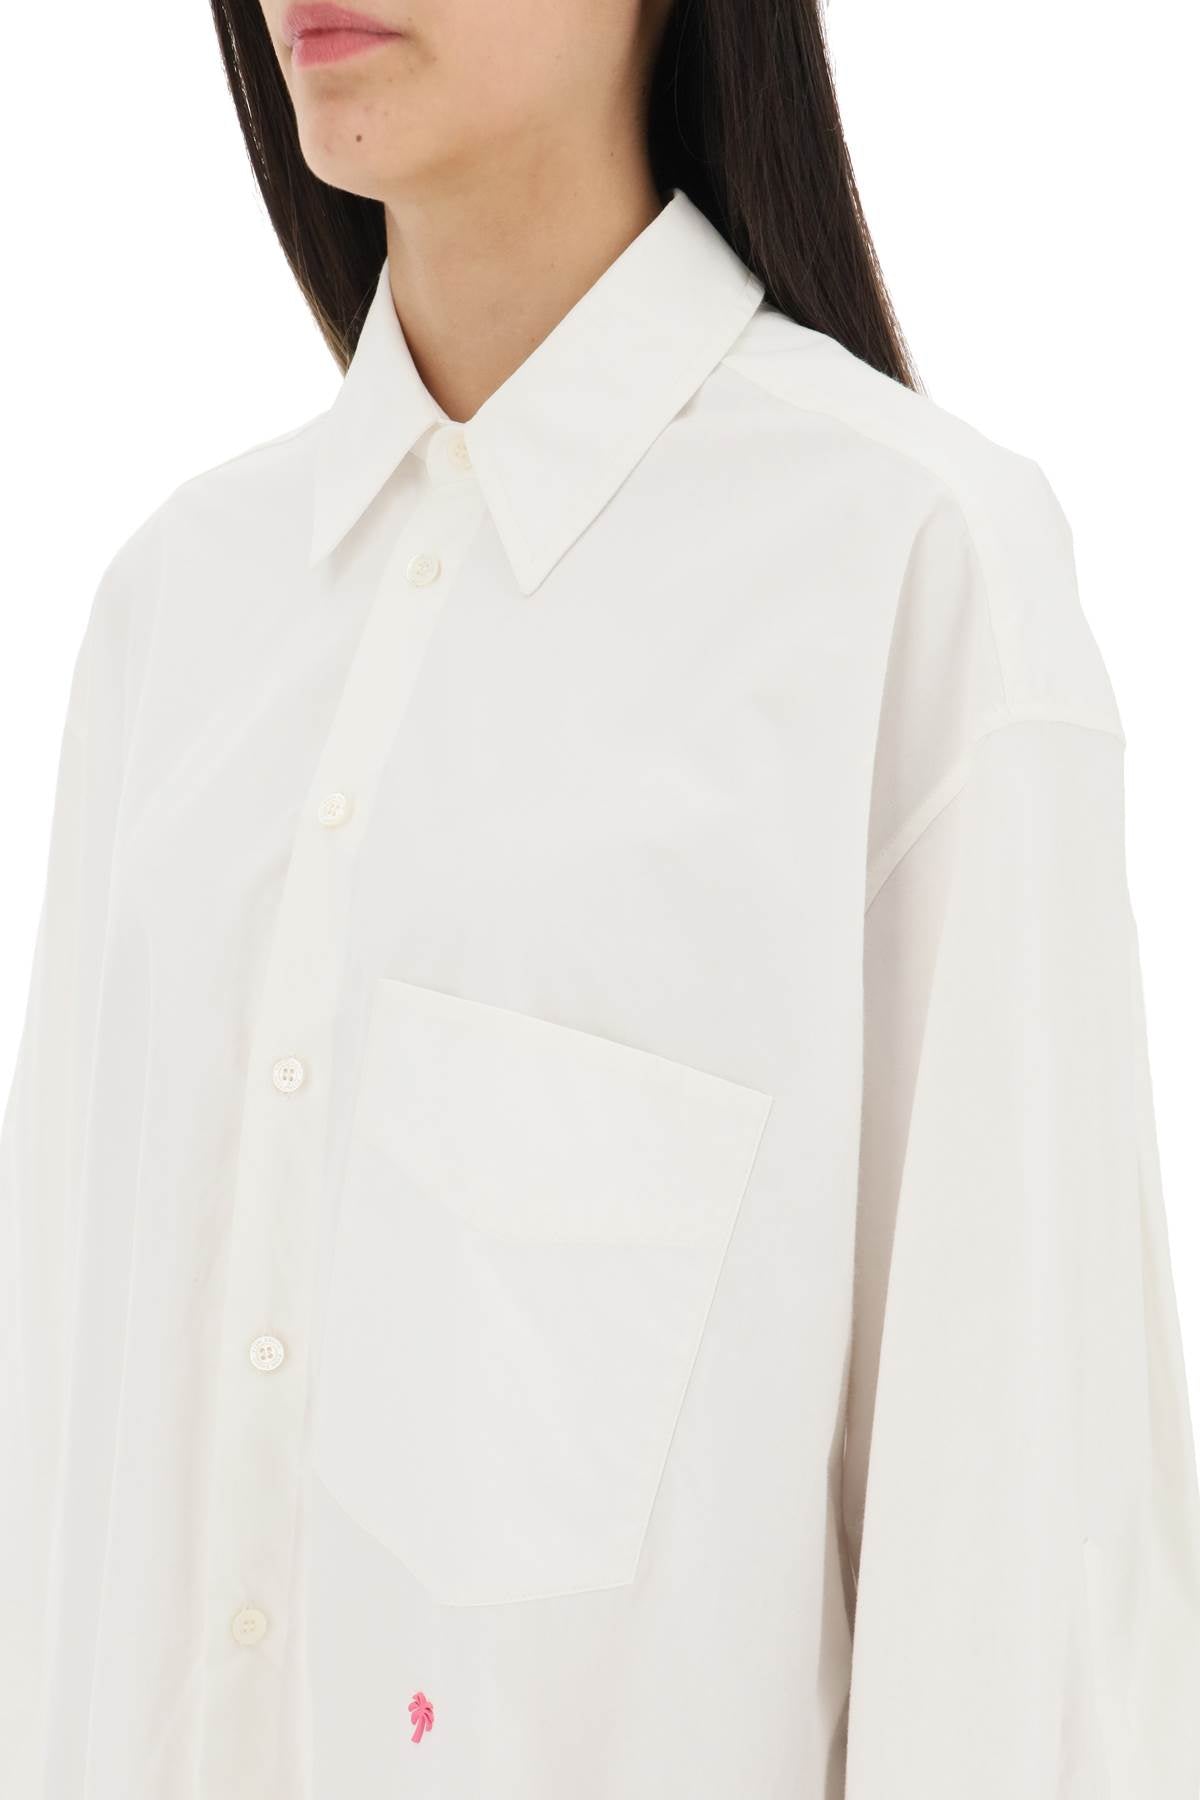 Palm Angels Shirt Dress With Bell Sleeves   White